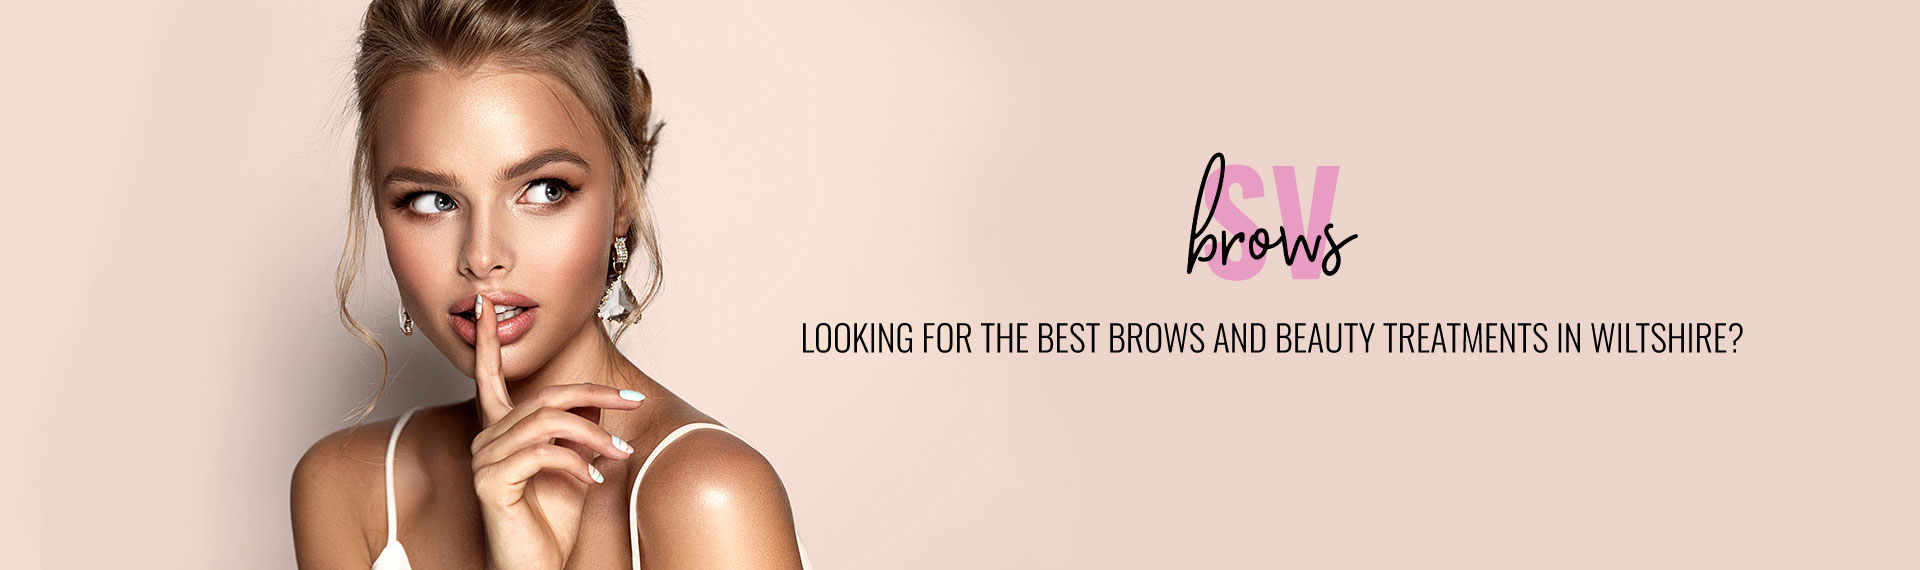 LOOKING FOR THE BEST BROWS AND BEAUTY TREATMENTS IN WILTSHIRE